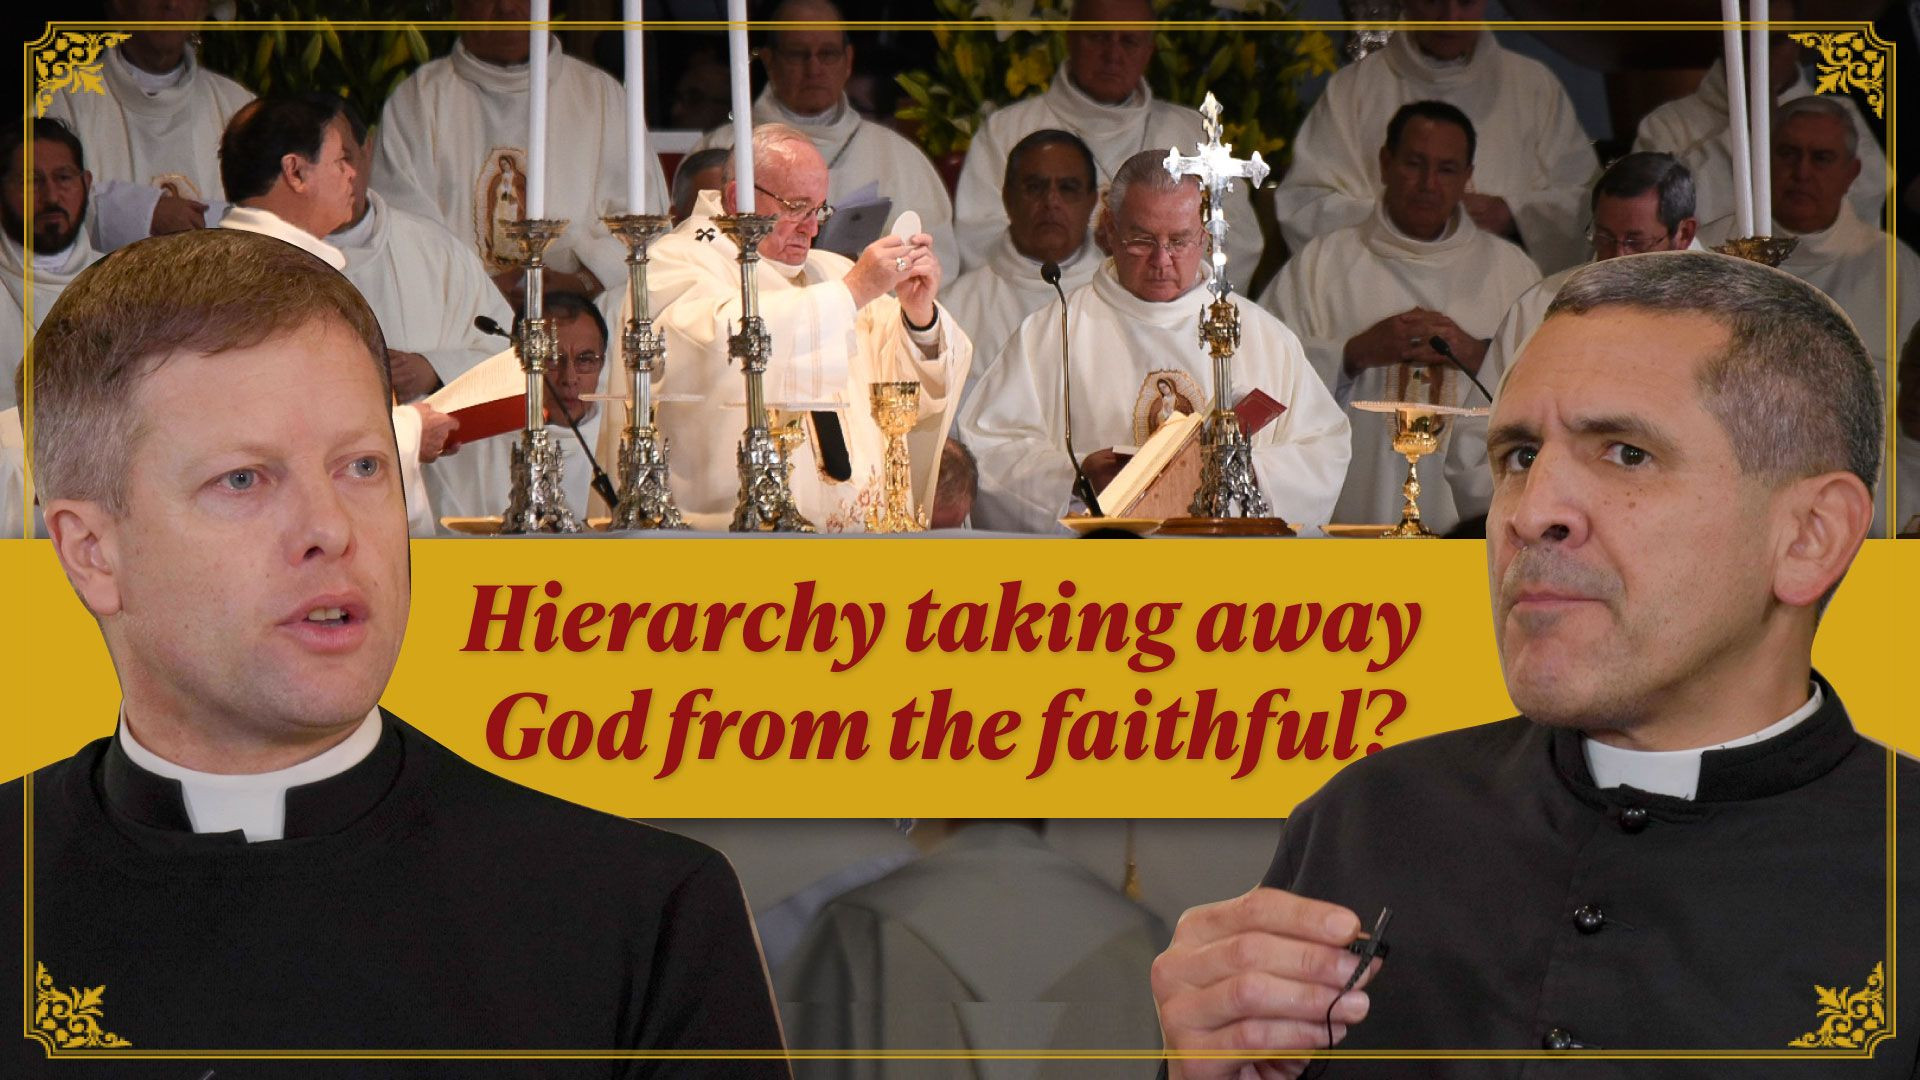 ⁣"God is being taken away from the faithful by the hierarchy"